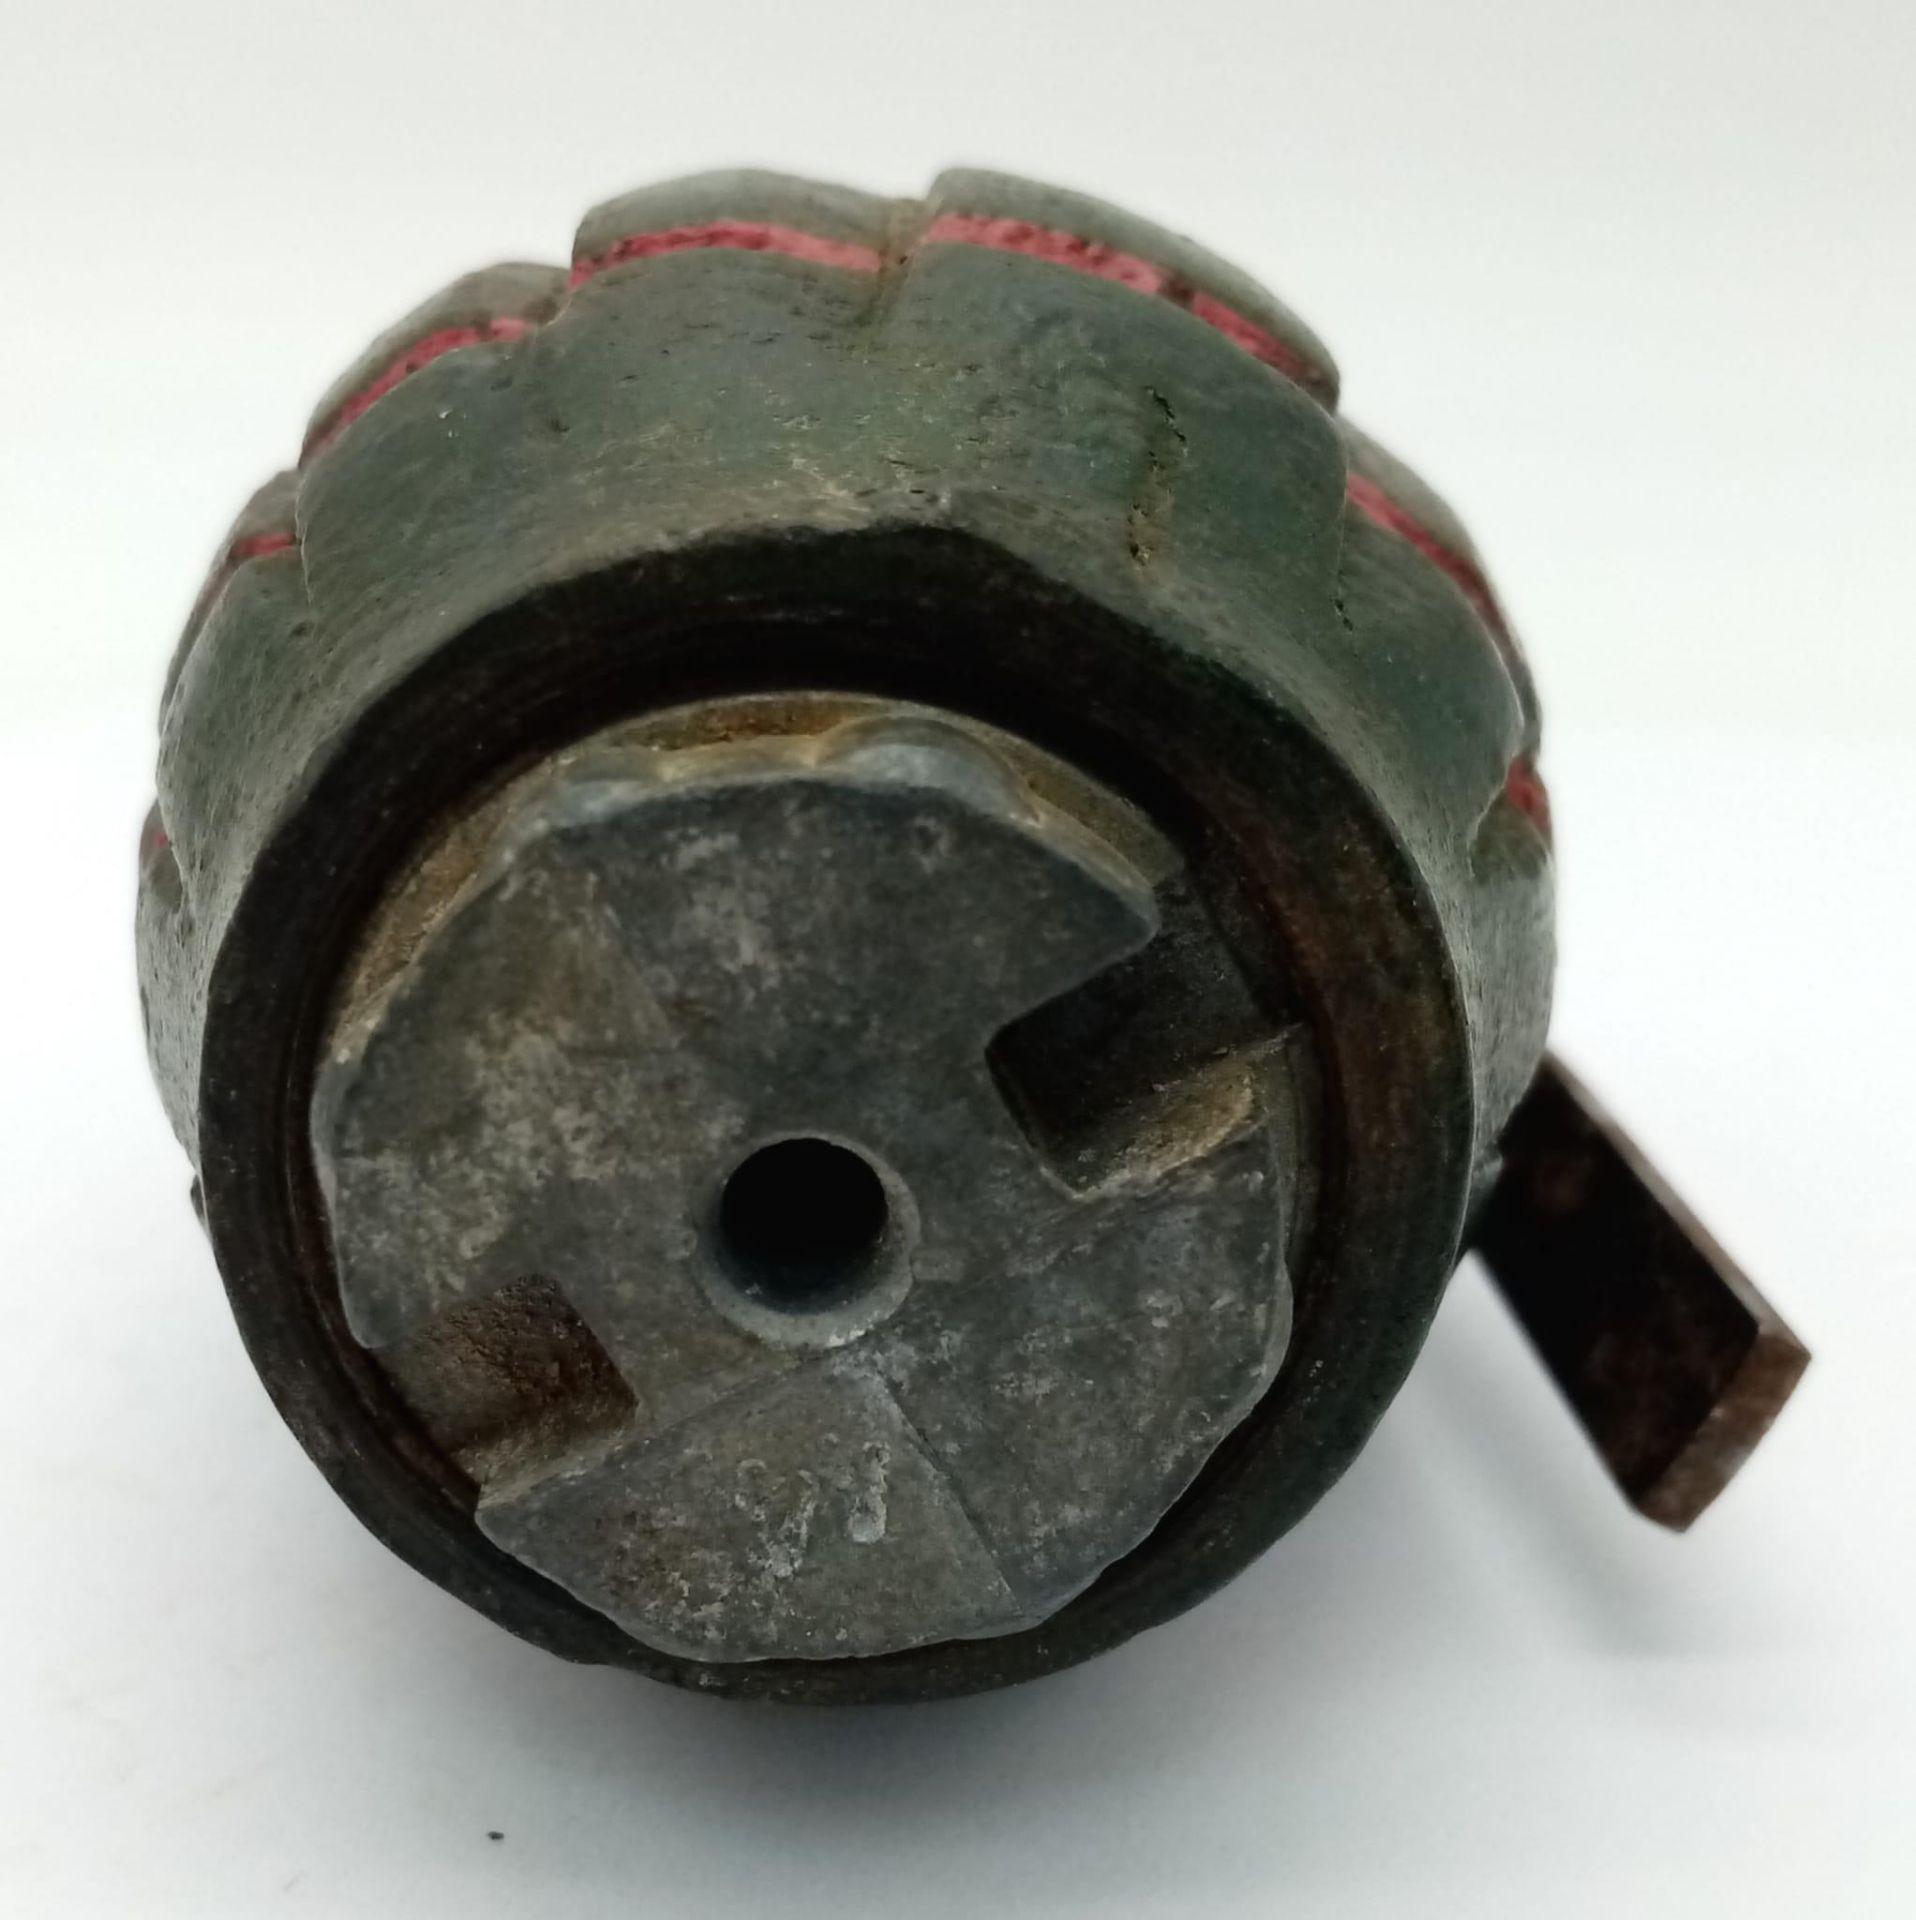 INERT Israeli Made No 36 Mills Grenade. Circa late 1940s-Mid 1950’s. UK Mainland Sales Only. - Image 6 of 6